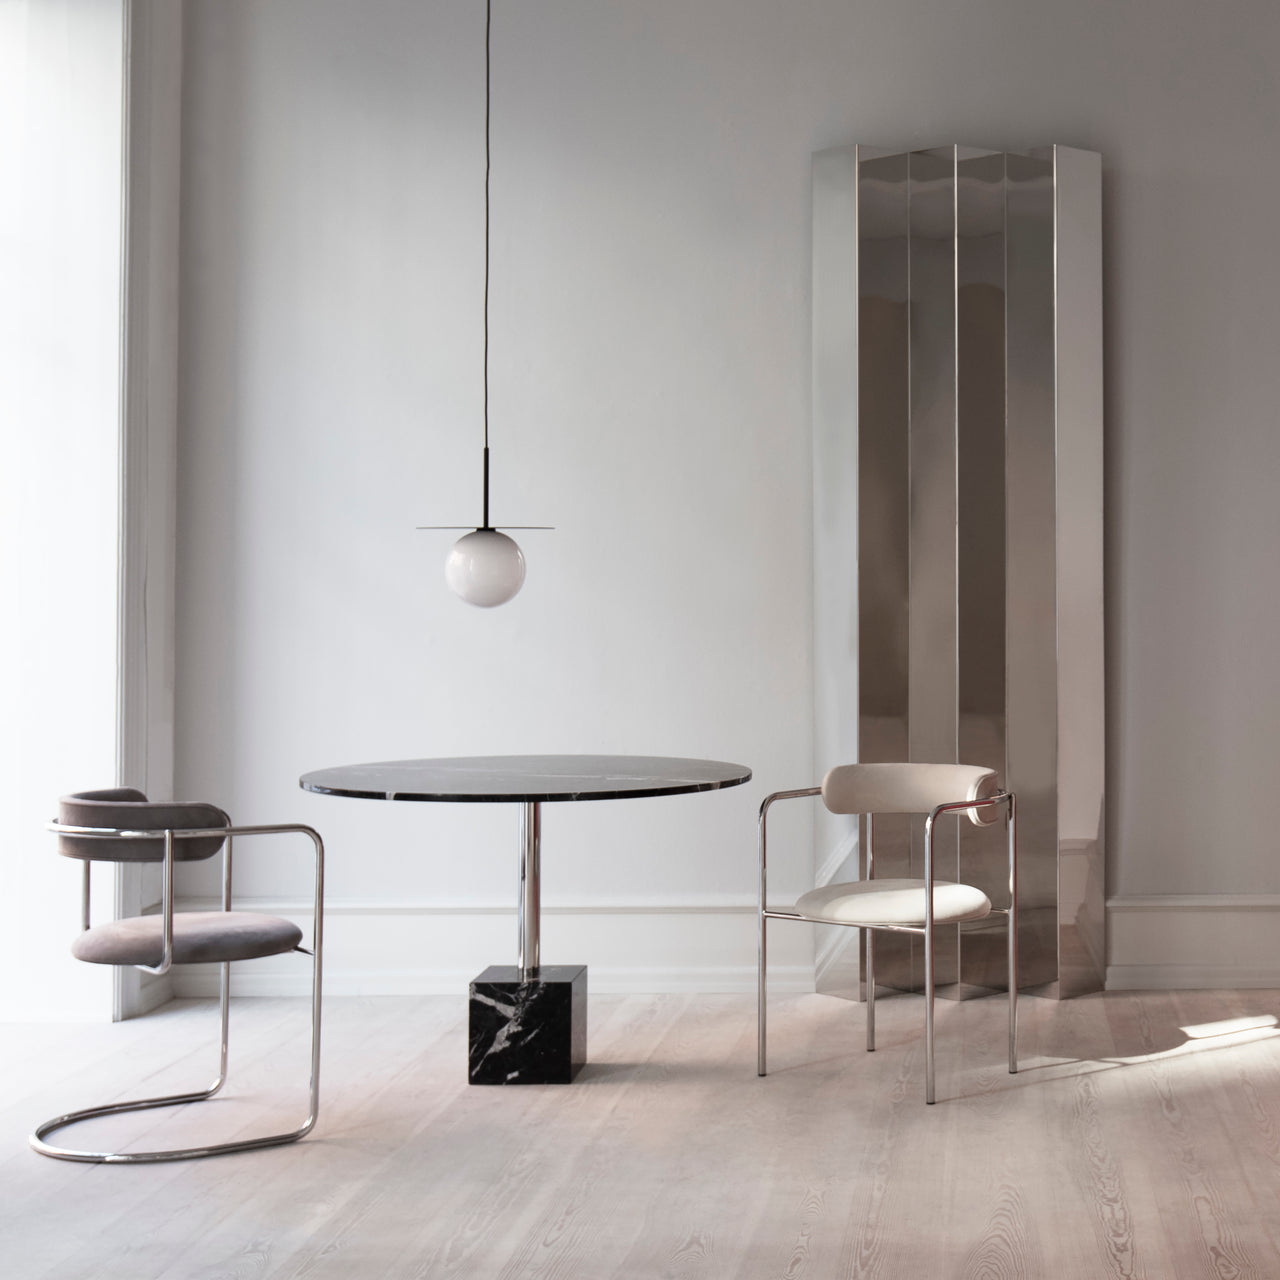 FF Chair: Cantilever